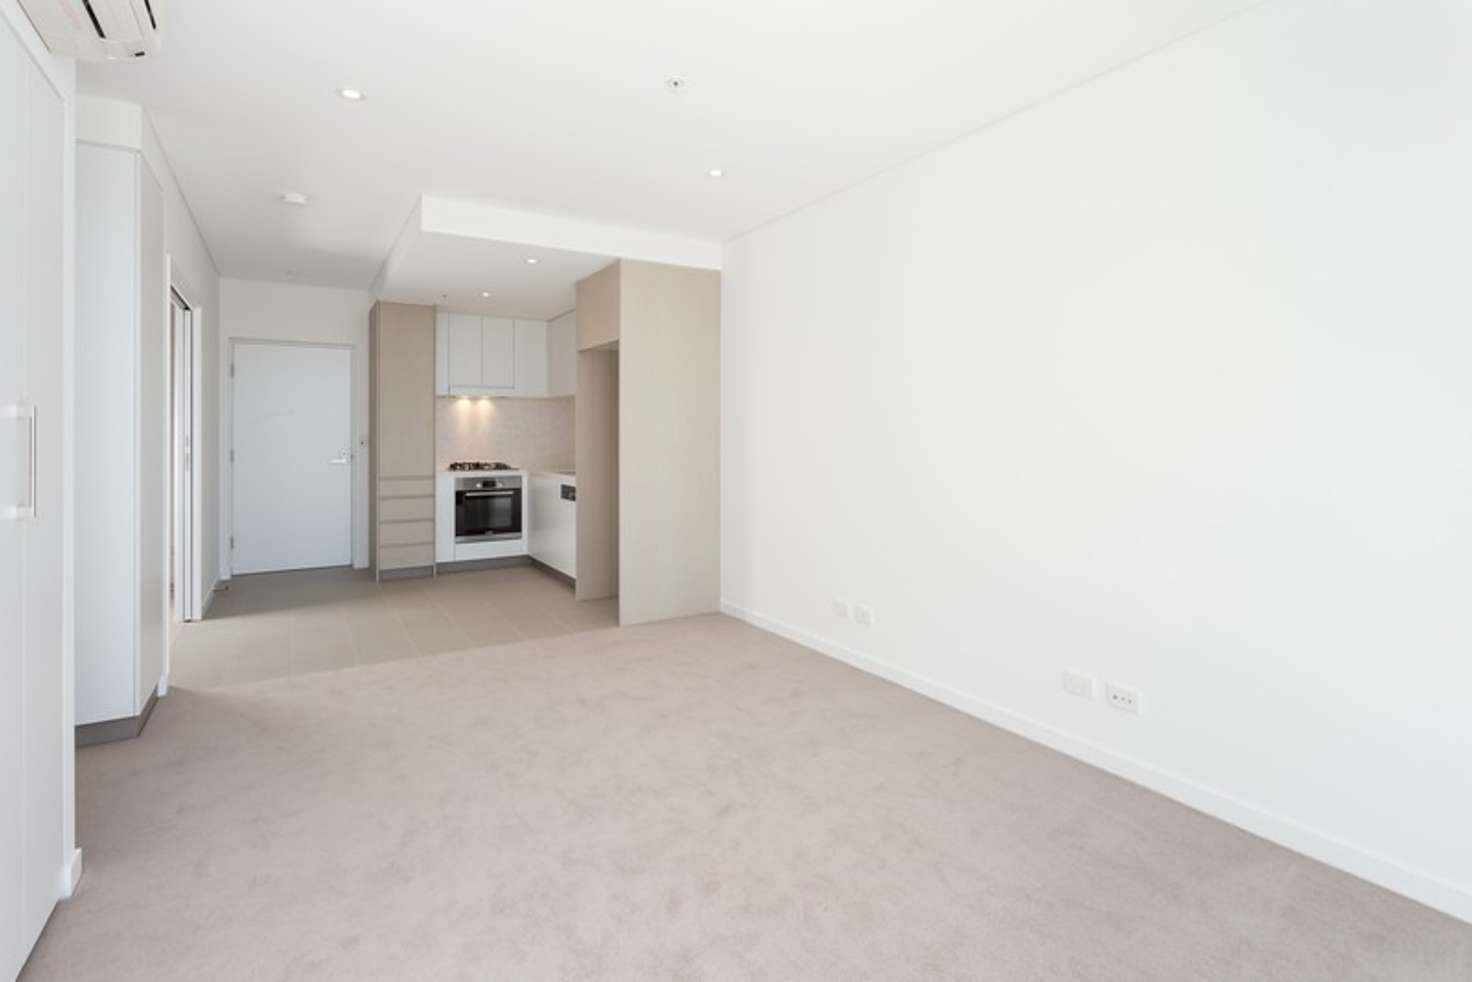 Main view of Homely apartment listing, 10116/320 MacArthur Ave, Hamilton QLD 4007